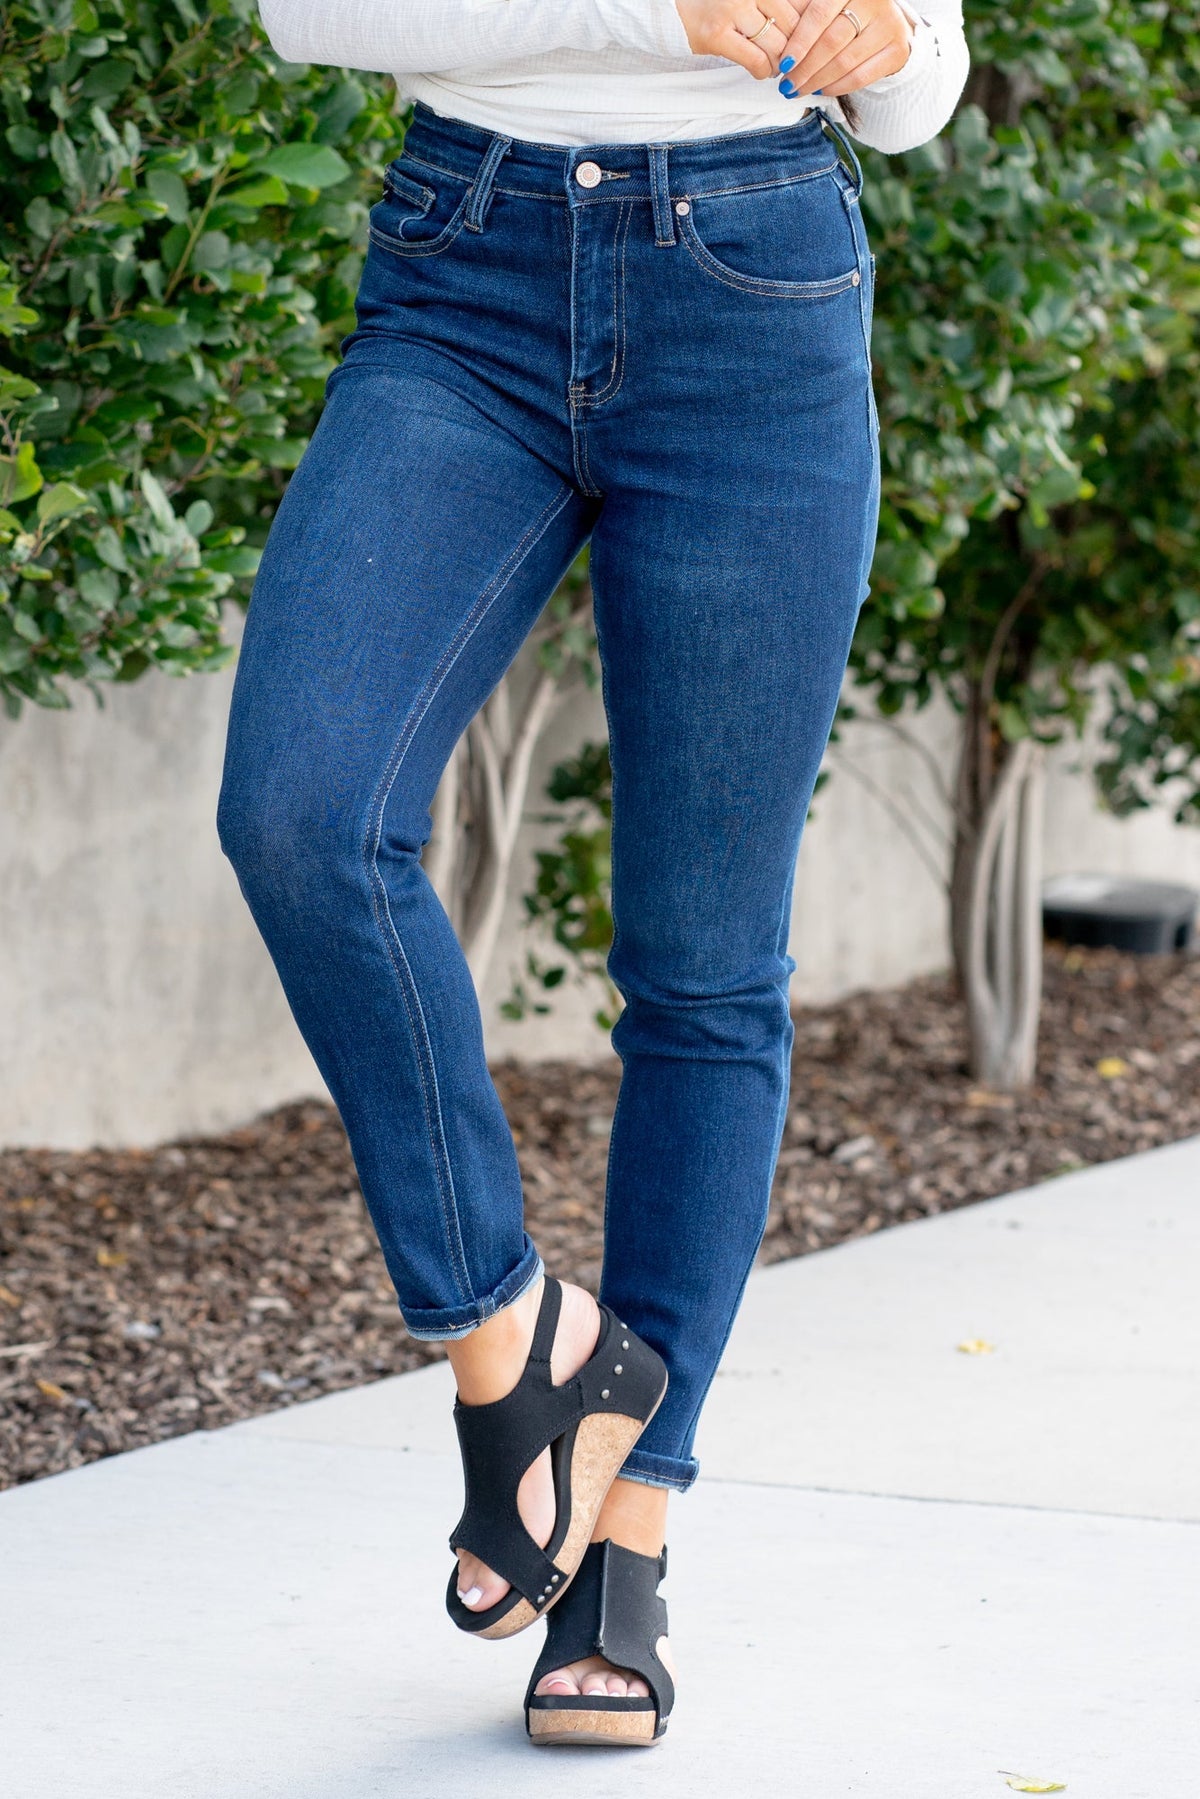 KanCan Jeans  With a high waist and cigarette straight fit, these will be your go-to jeans that will never go out of style. Color: Dark Blue  Cut: Straight Fit, 29" Inseam* Rise: High-Rise, 10.5" Front Rise* 75%COTTON, 23%TENCEL 2%SPANDEX Fly: Zipper Style #: KC4009D Contact us for any additional measurements or sizing.  *Measured on the smallest size, measurements may vary by size.